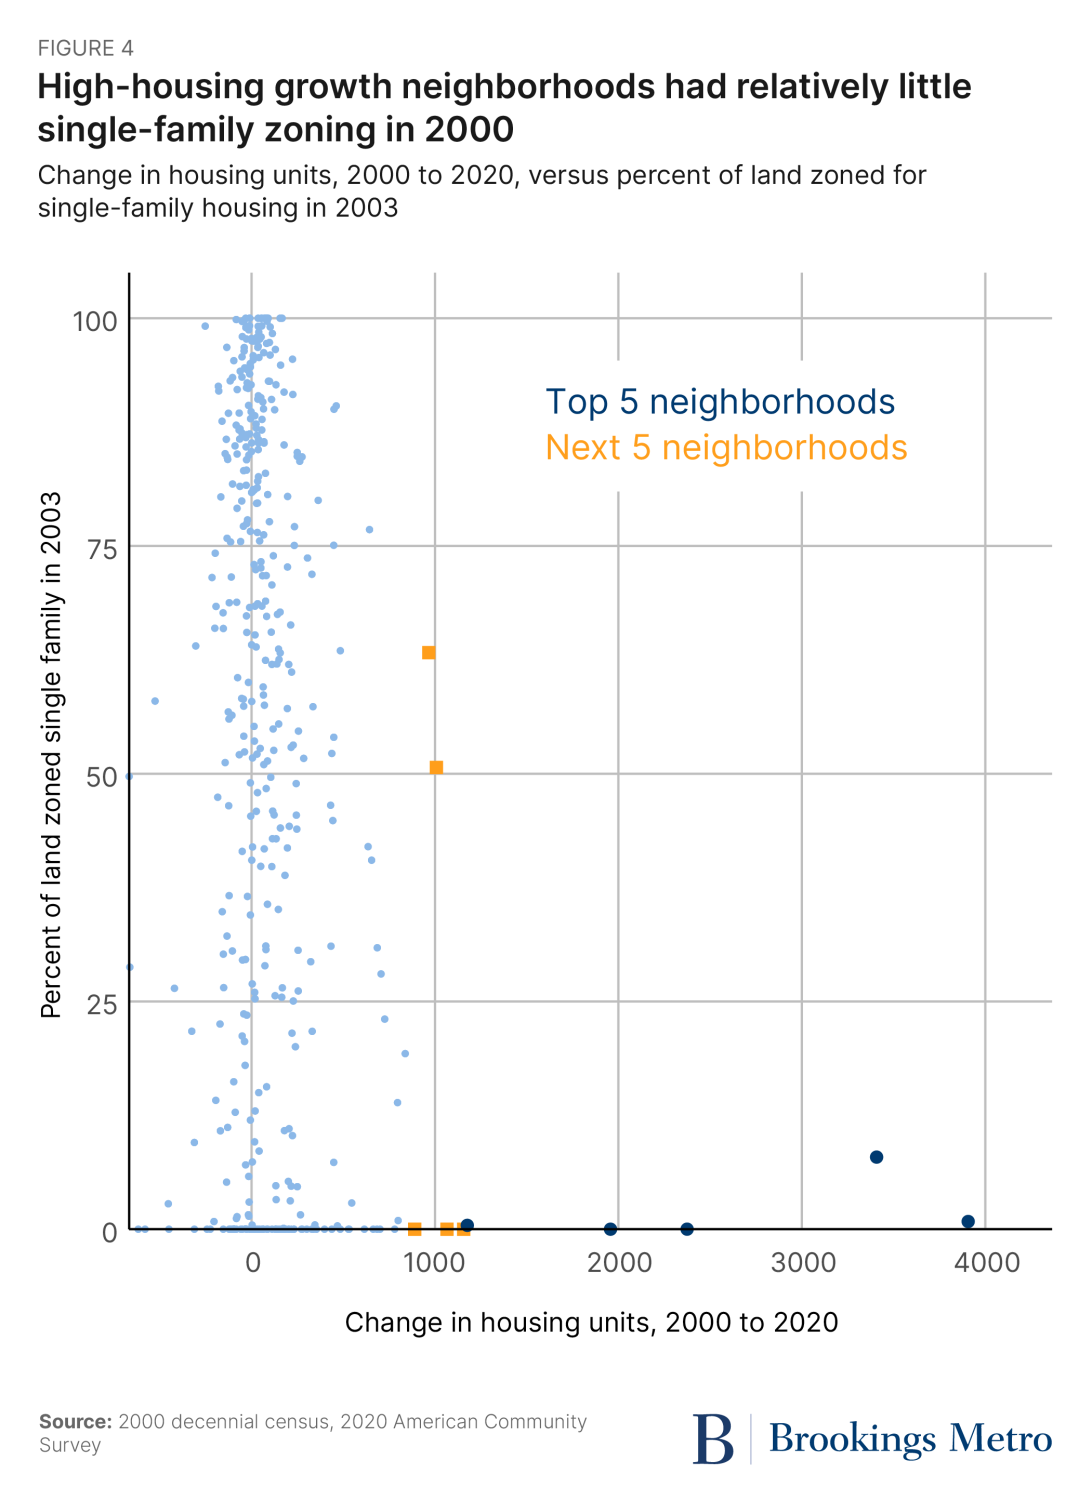 Figure 4. High-housing growth neighborhoods had relatively little single-family zoning in 2000